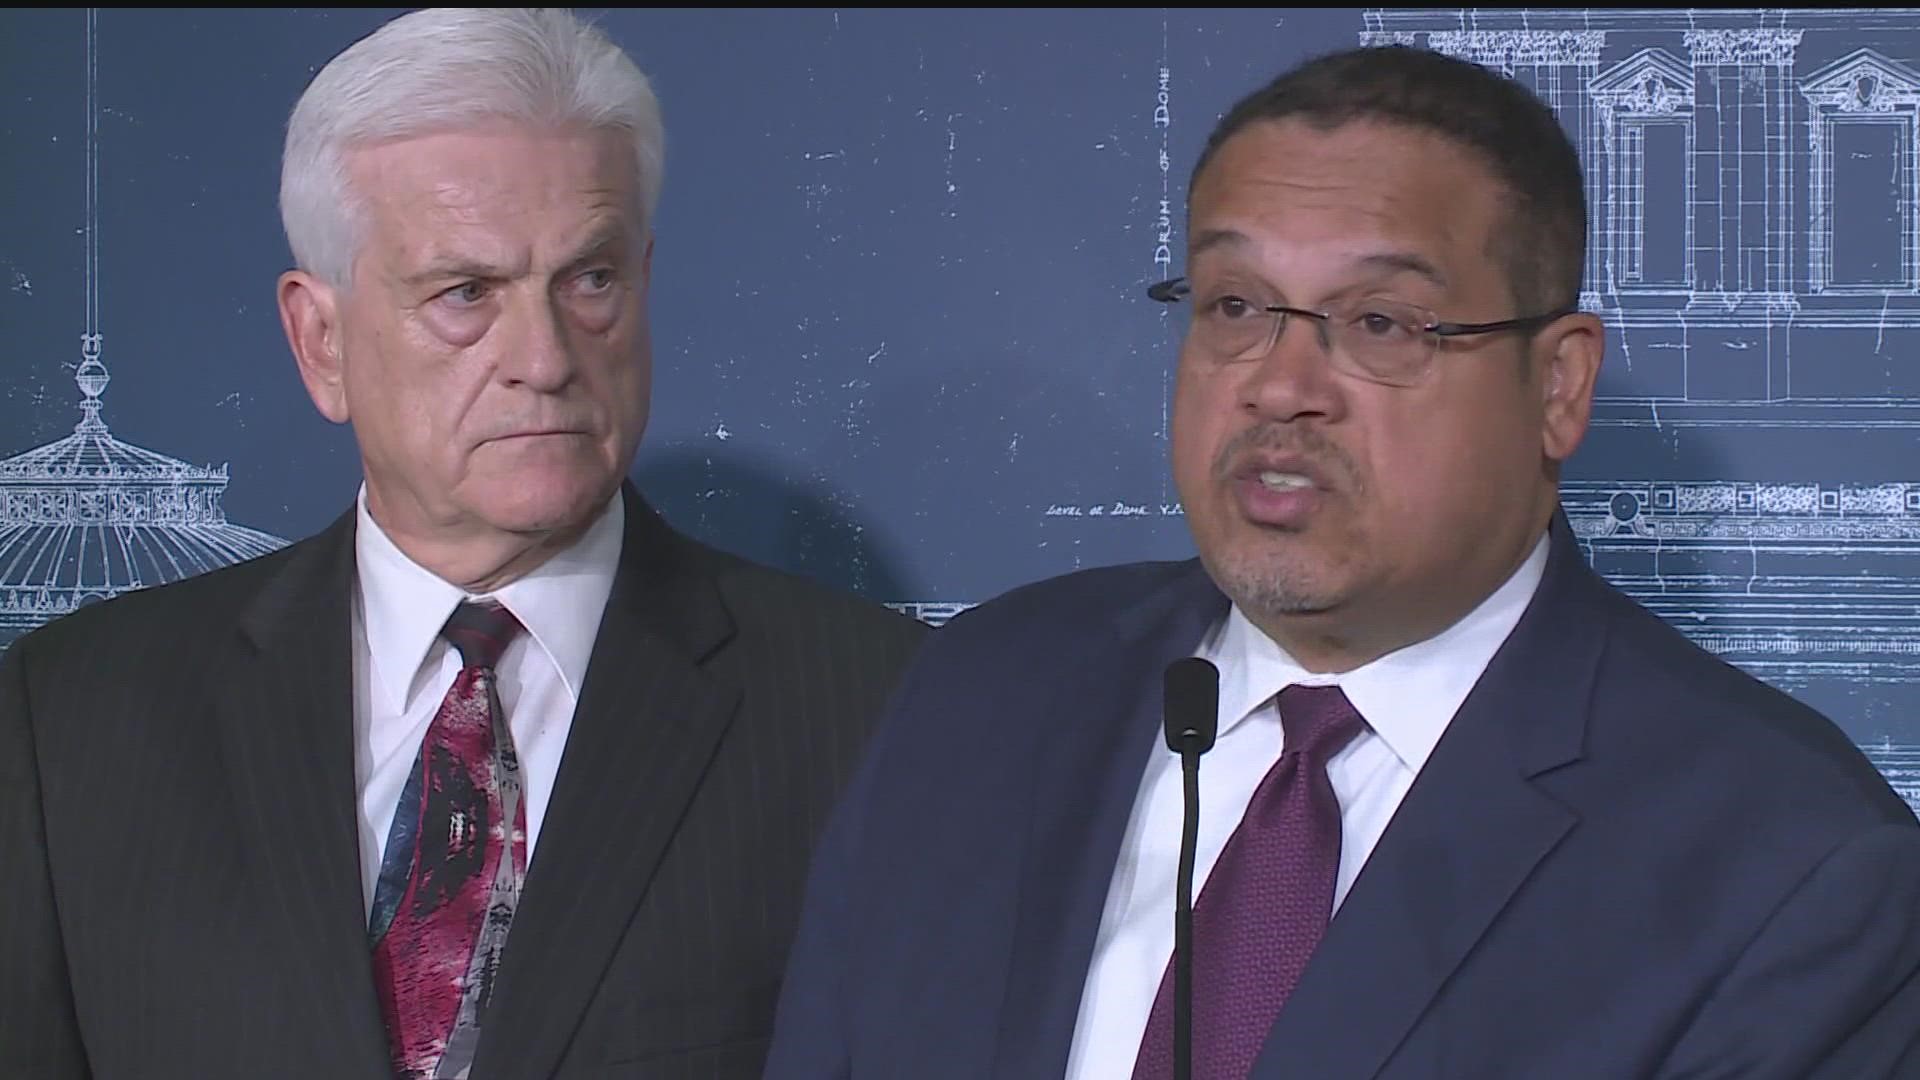 In a year the state has a $9 billion surplus, Ellison is asking for $1.8 million dollars to hire seven more prosecutors and two paralegals.